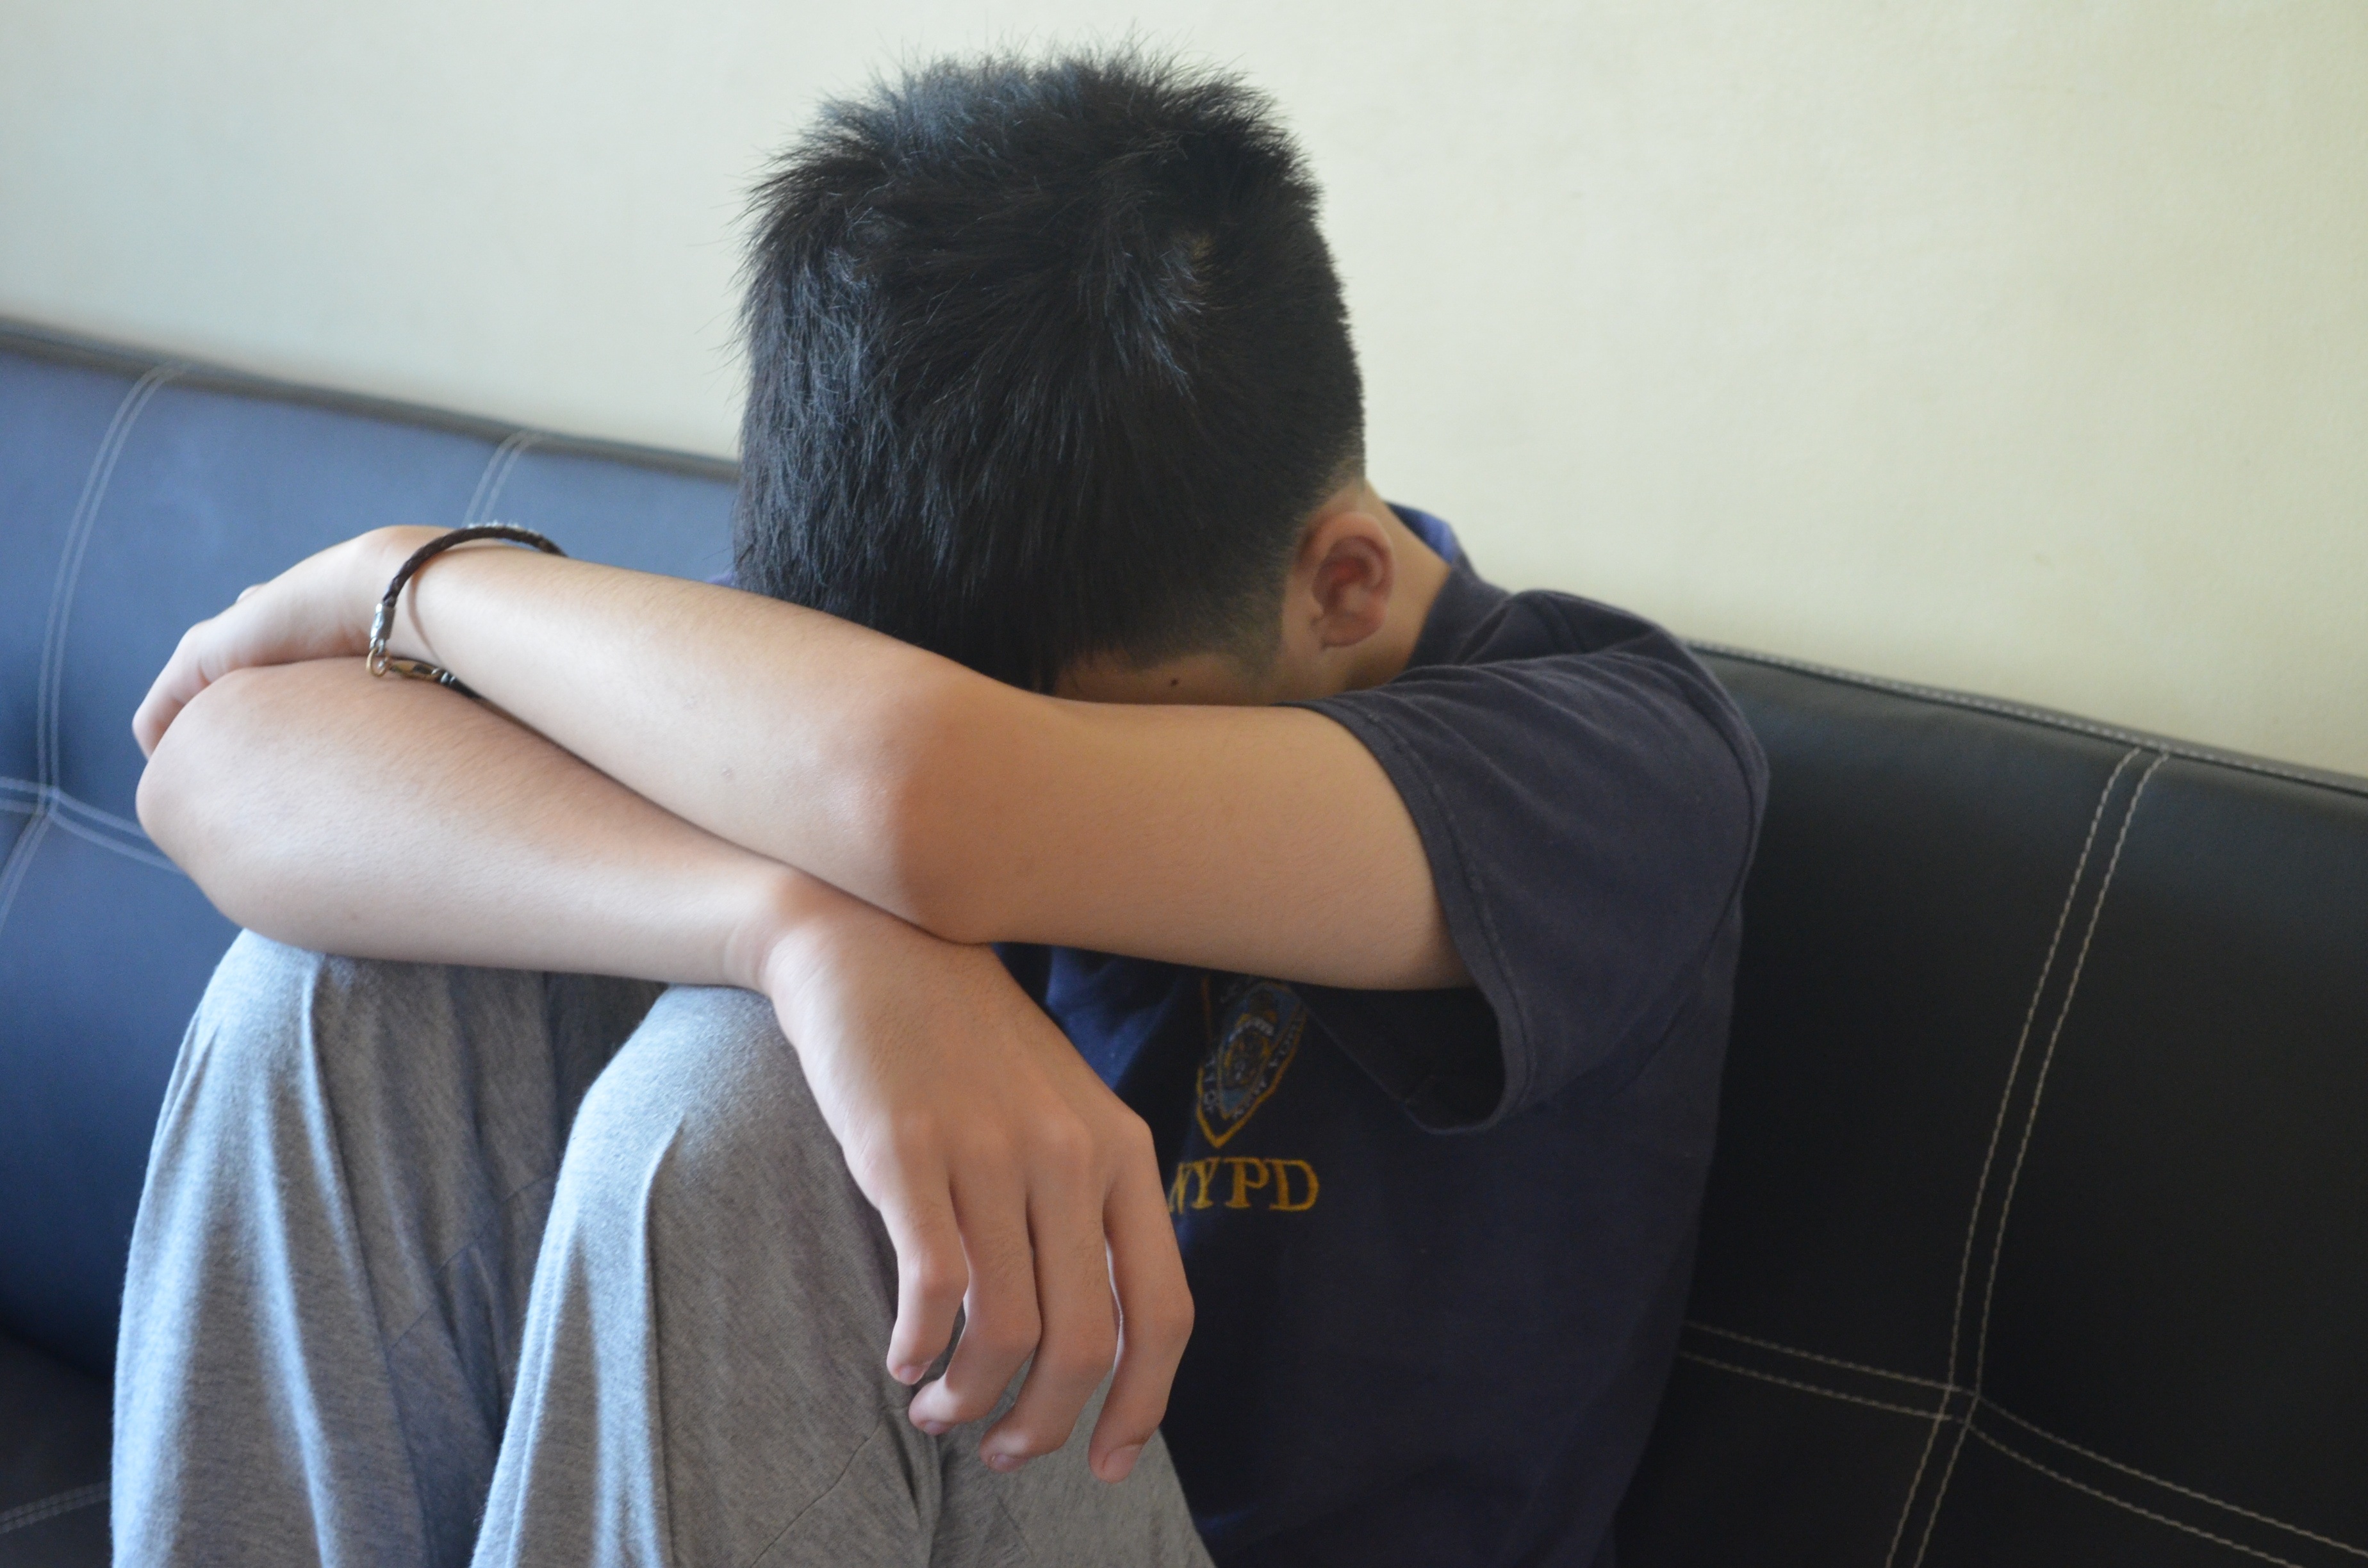 Xxnx Rape - 13-year-old boy sexually abused 'by 21 men' on Grindr | PinkNews